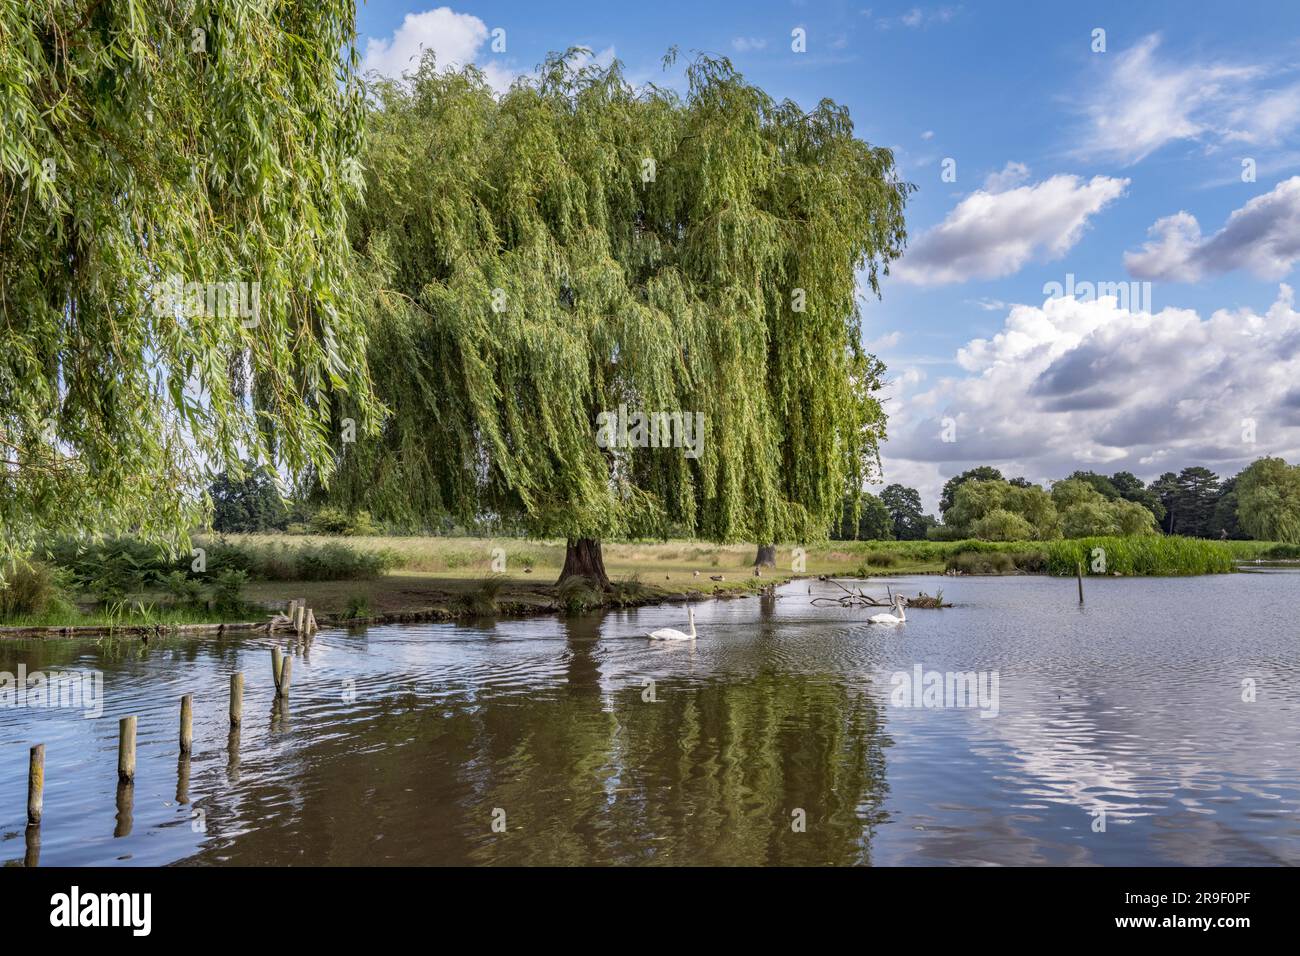 Weeping Willow tree growing on the bank of Heron pond in Budhy Park near London UK Stock Photo